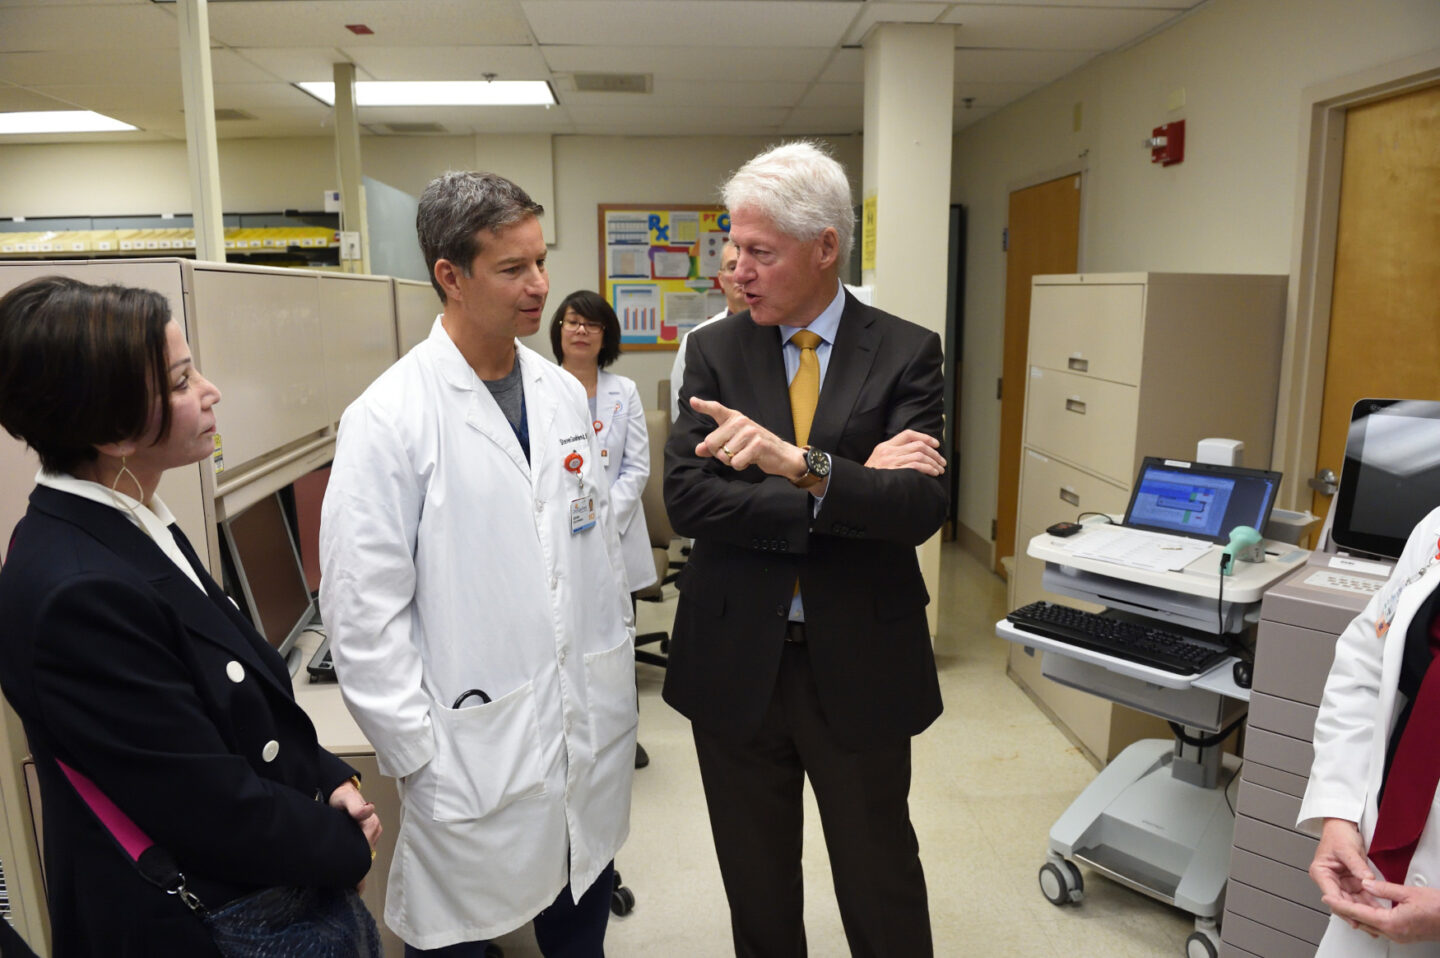 President Clinton speaks with a doctor inside a medical center